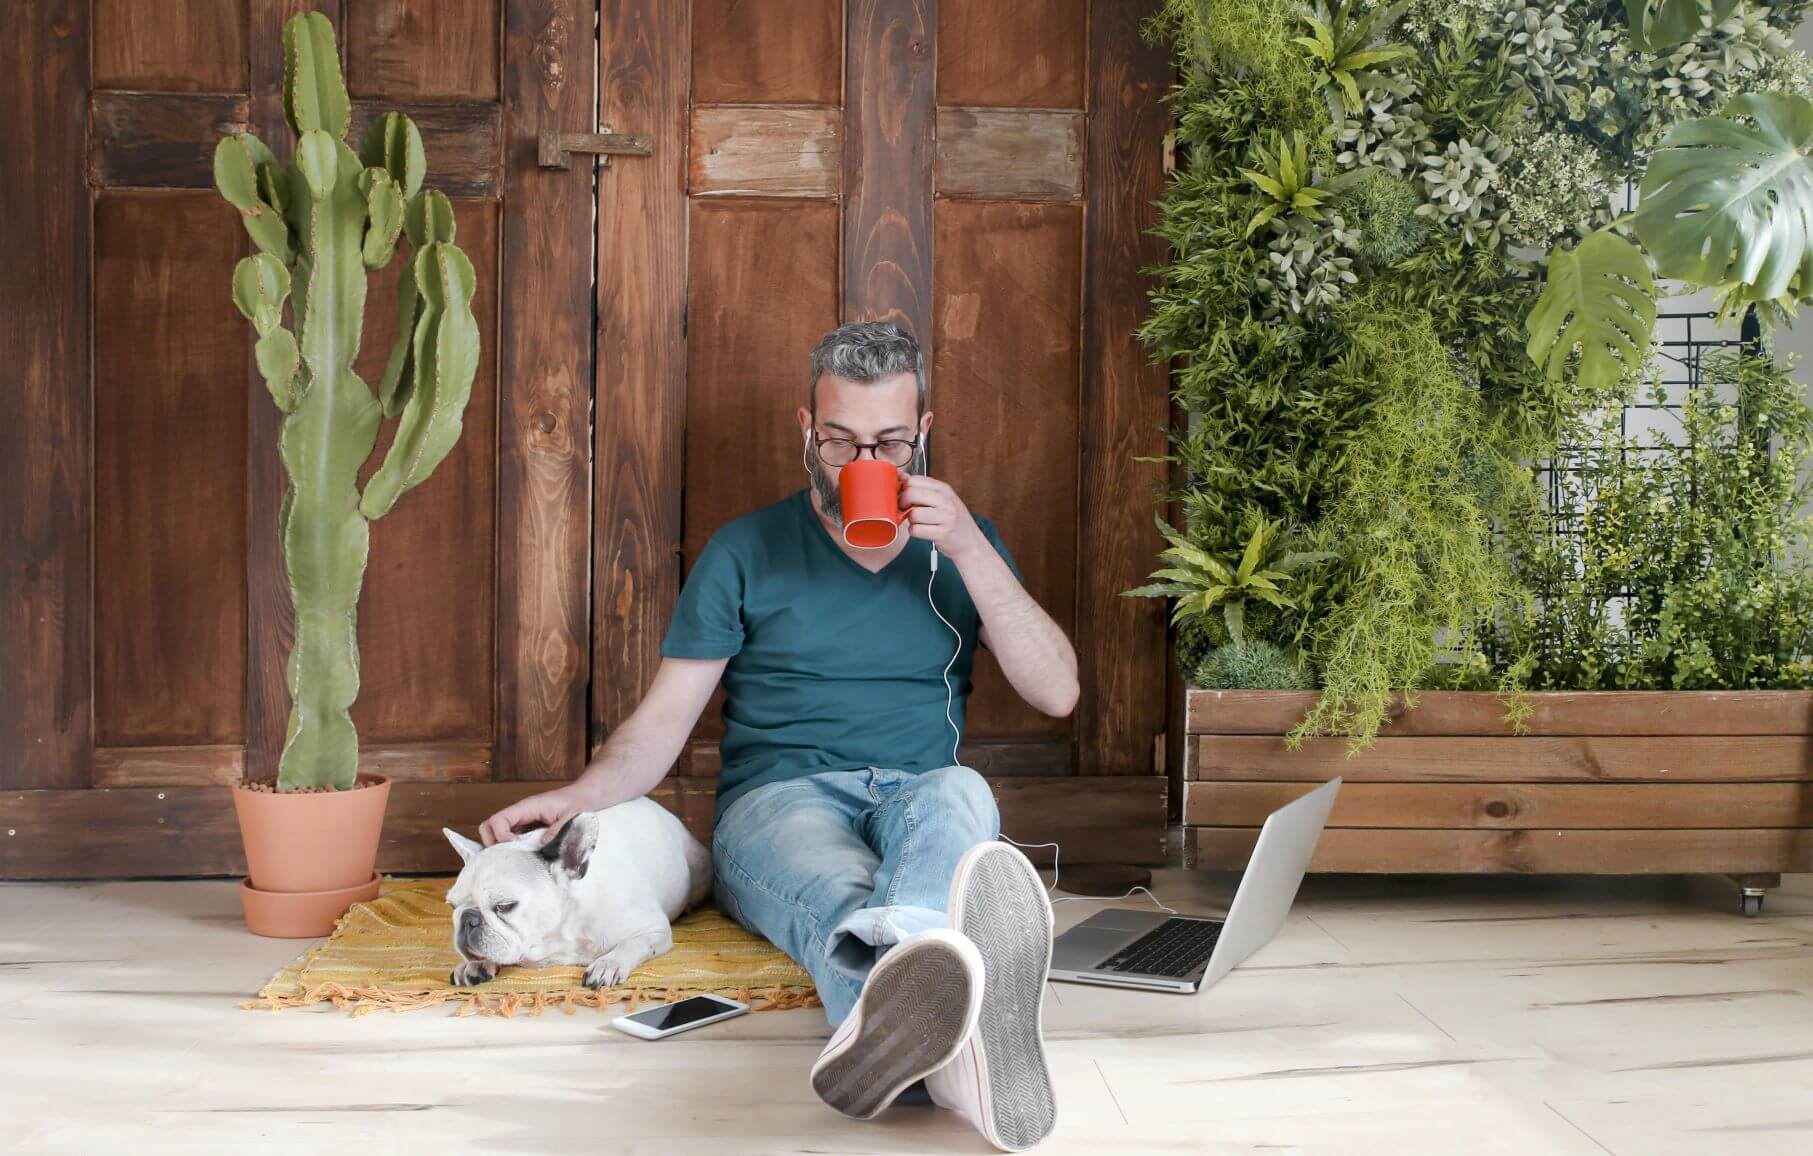 Man sitting with dog and plants